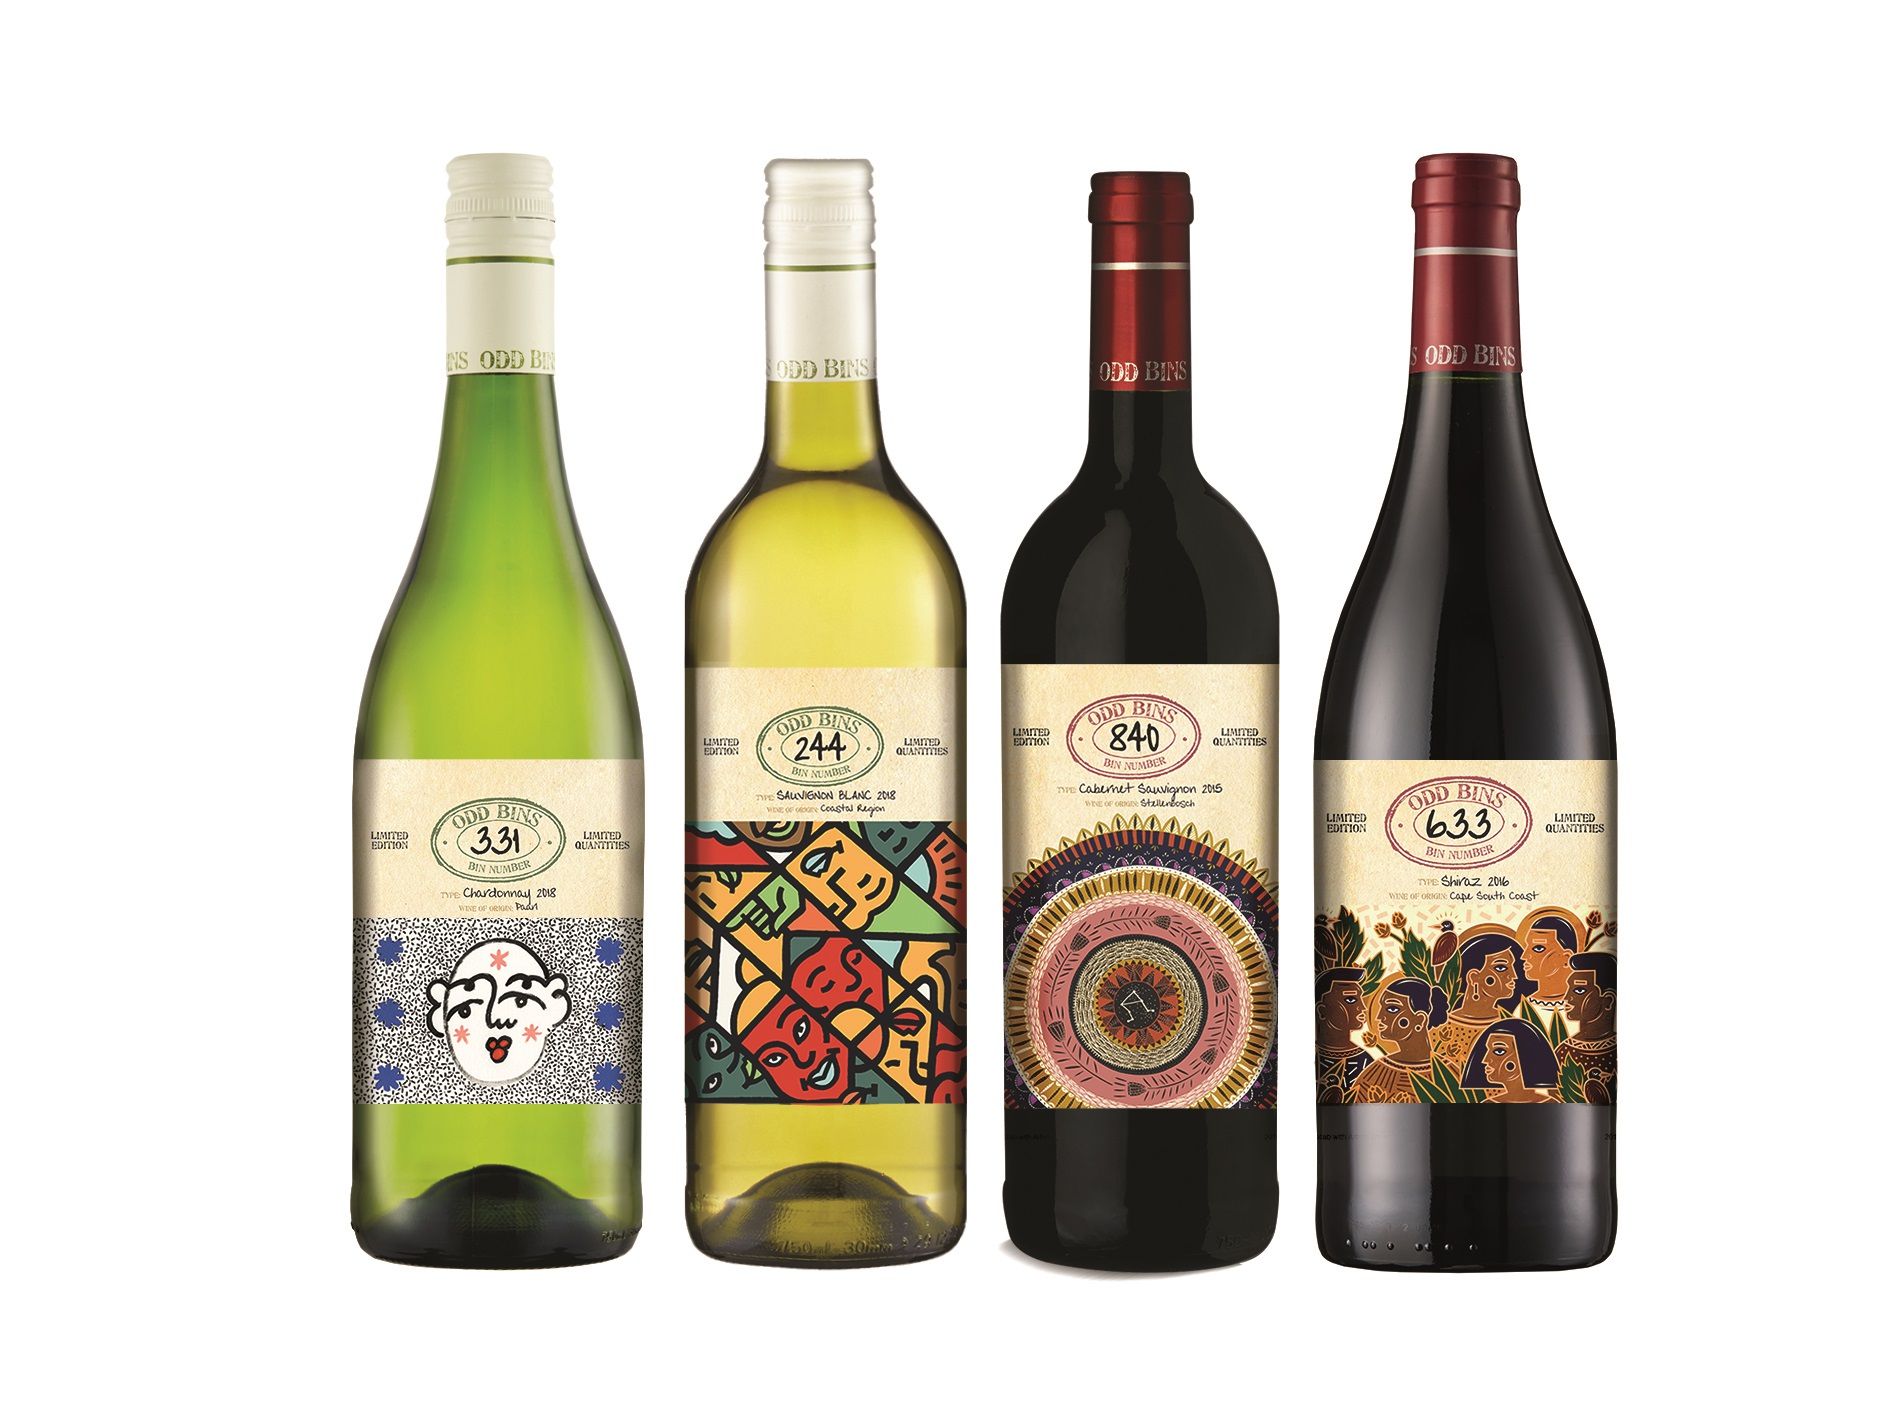 Checkers Collaborates With Sa Artists For Limited Edition Odd Bins Wines photo